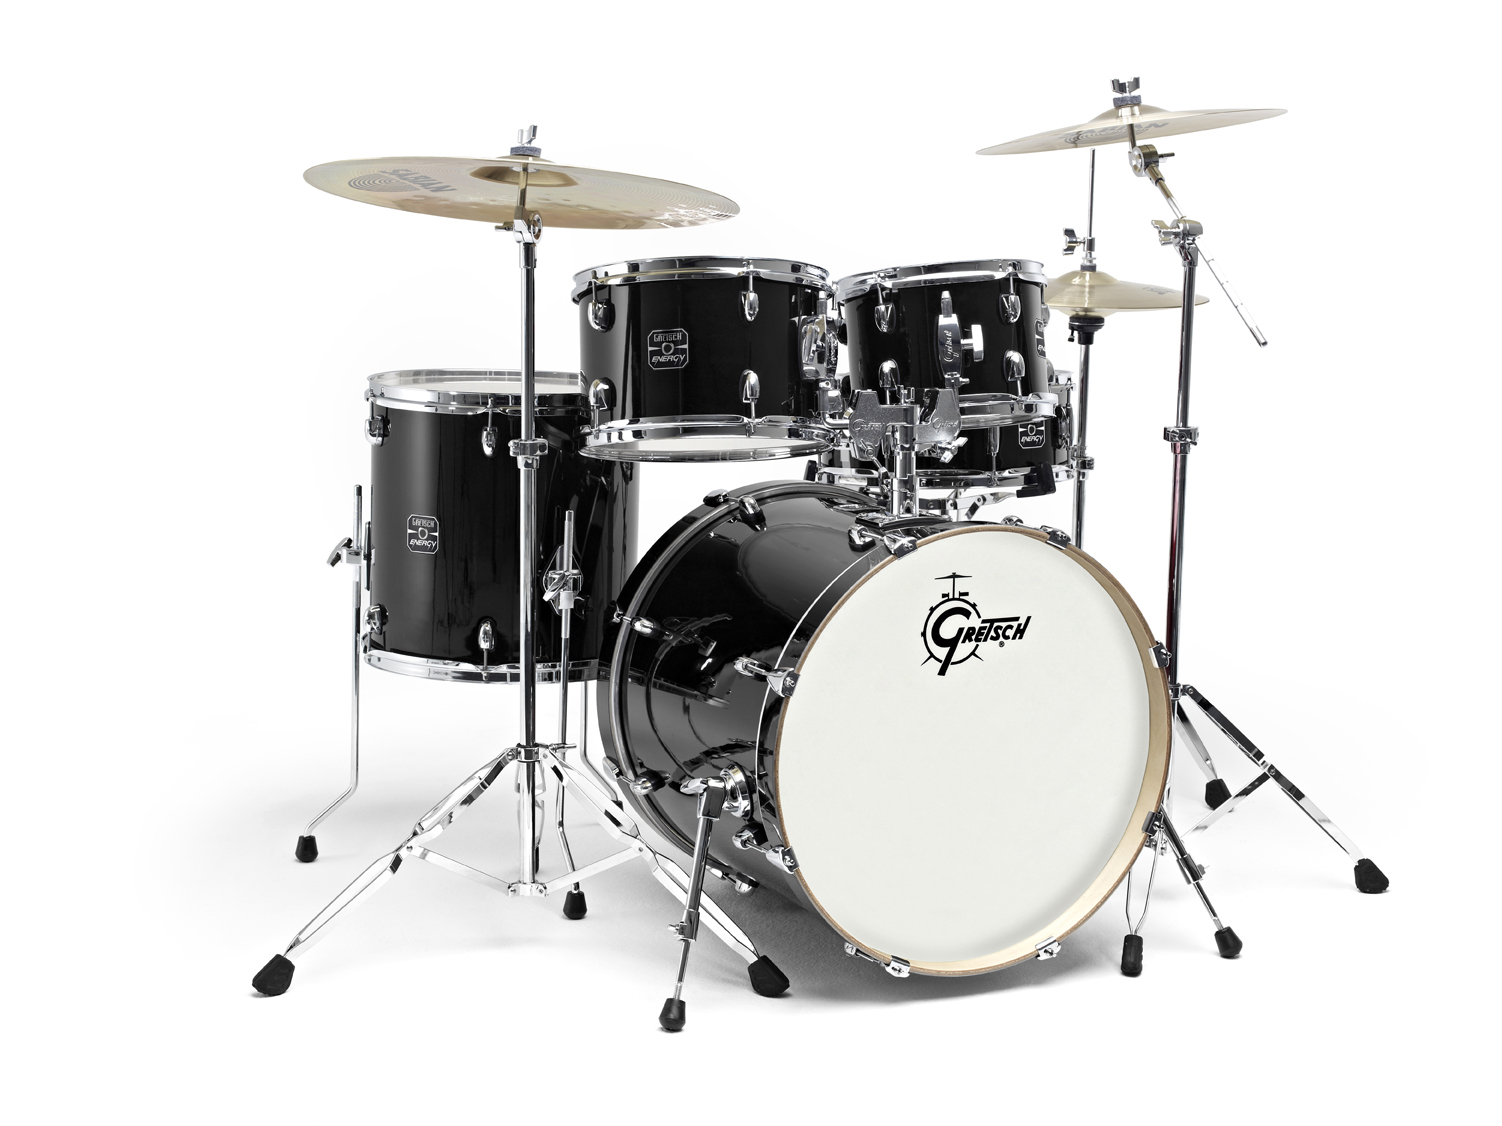 GRETSCH DRUMS GE2-E605TK-BK - NEW ENERGY FUSION 20